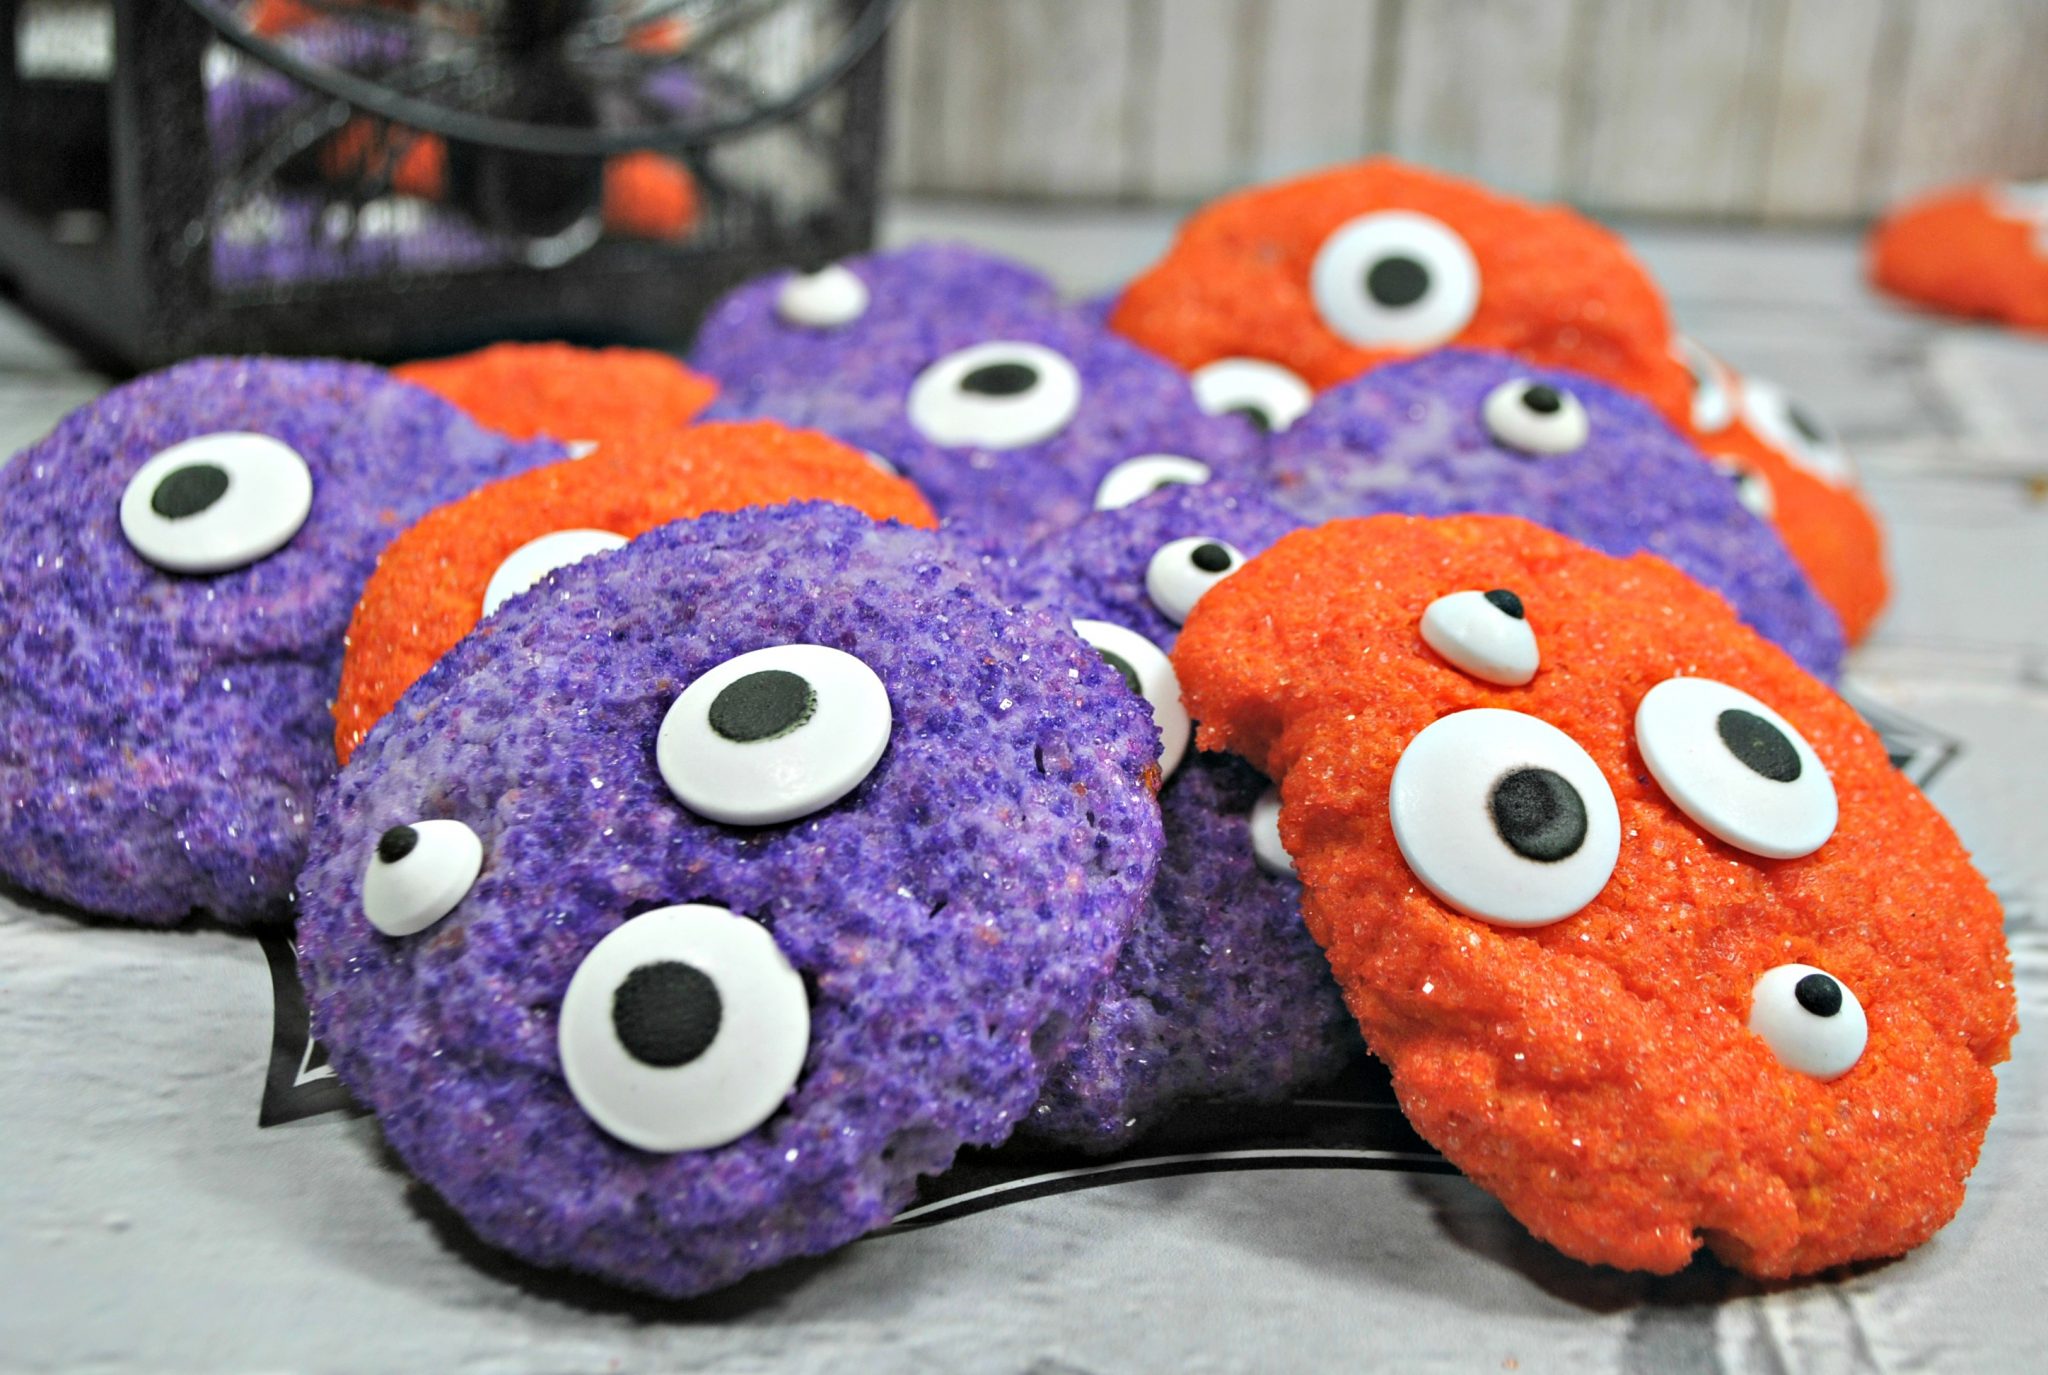 Finished monster eye cookies.